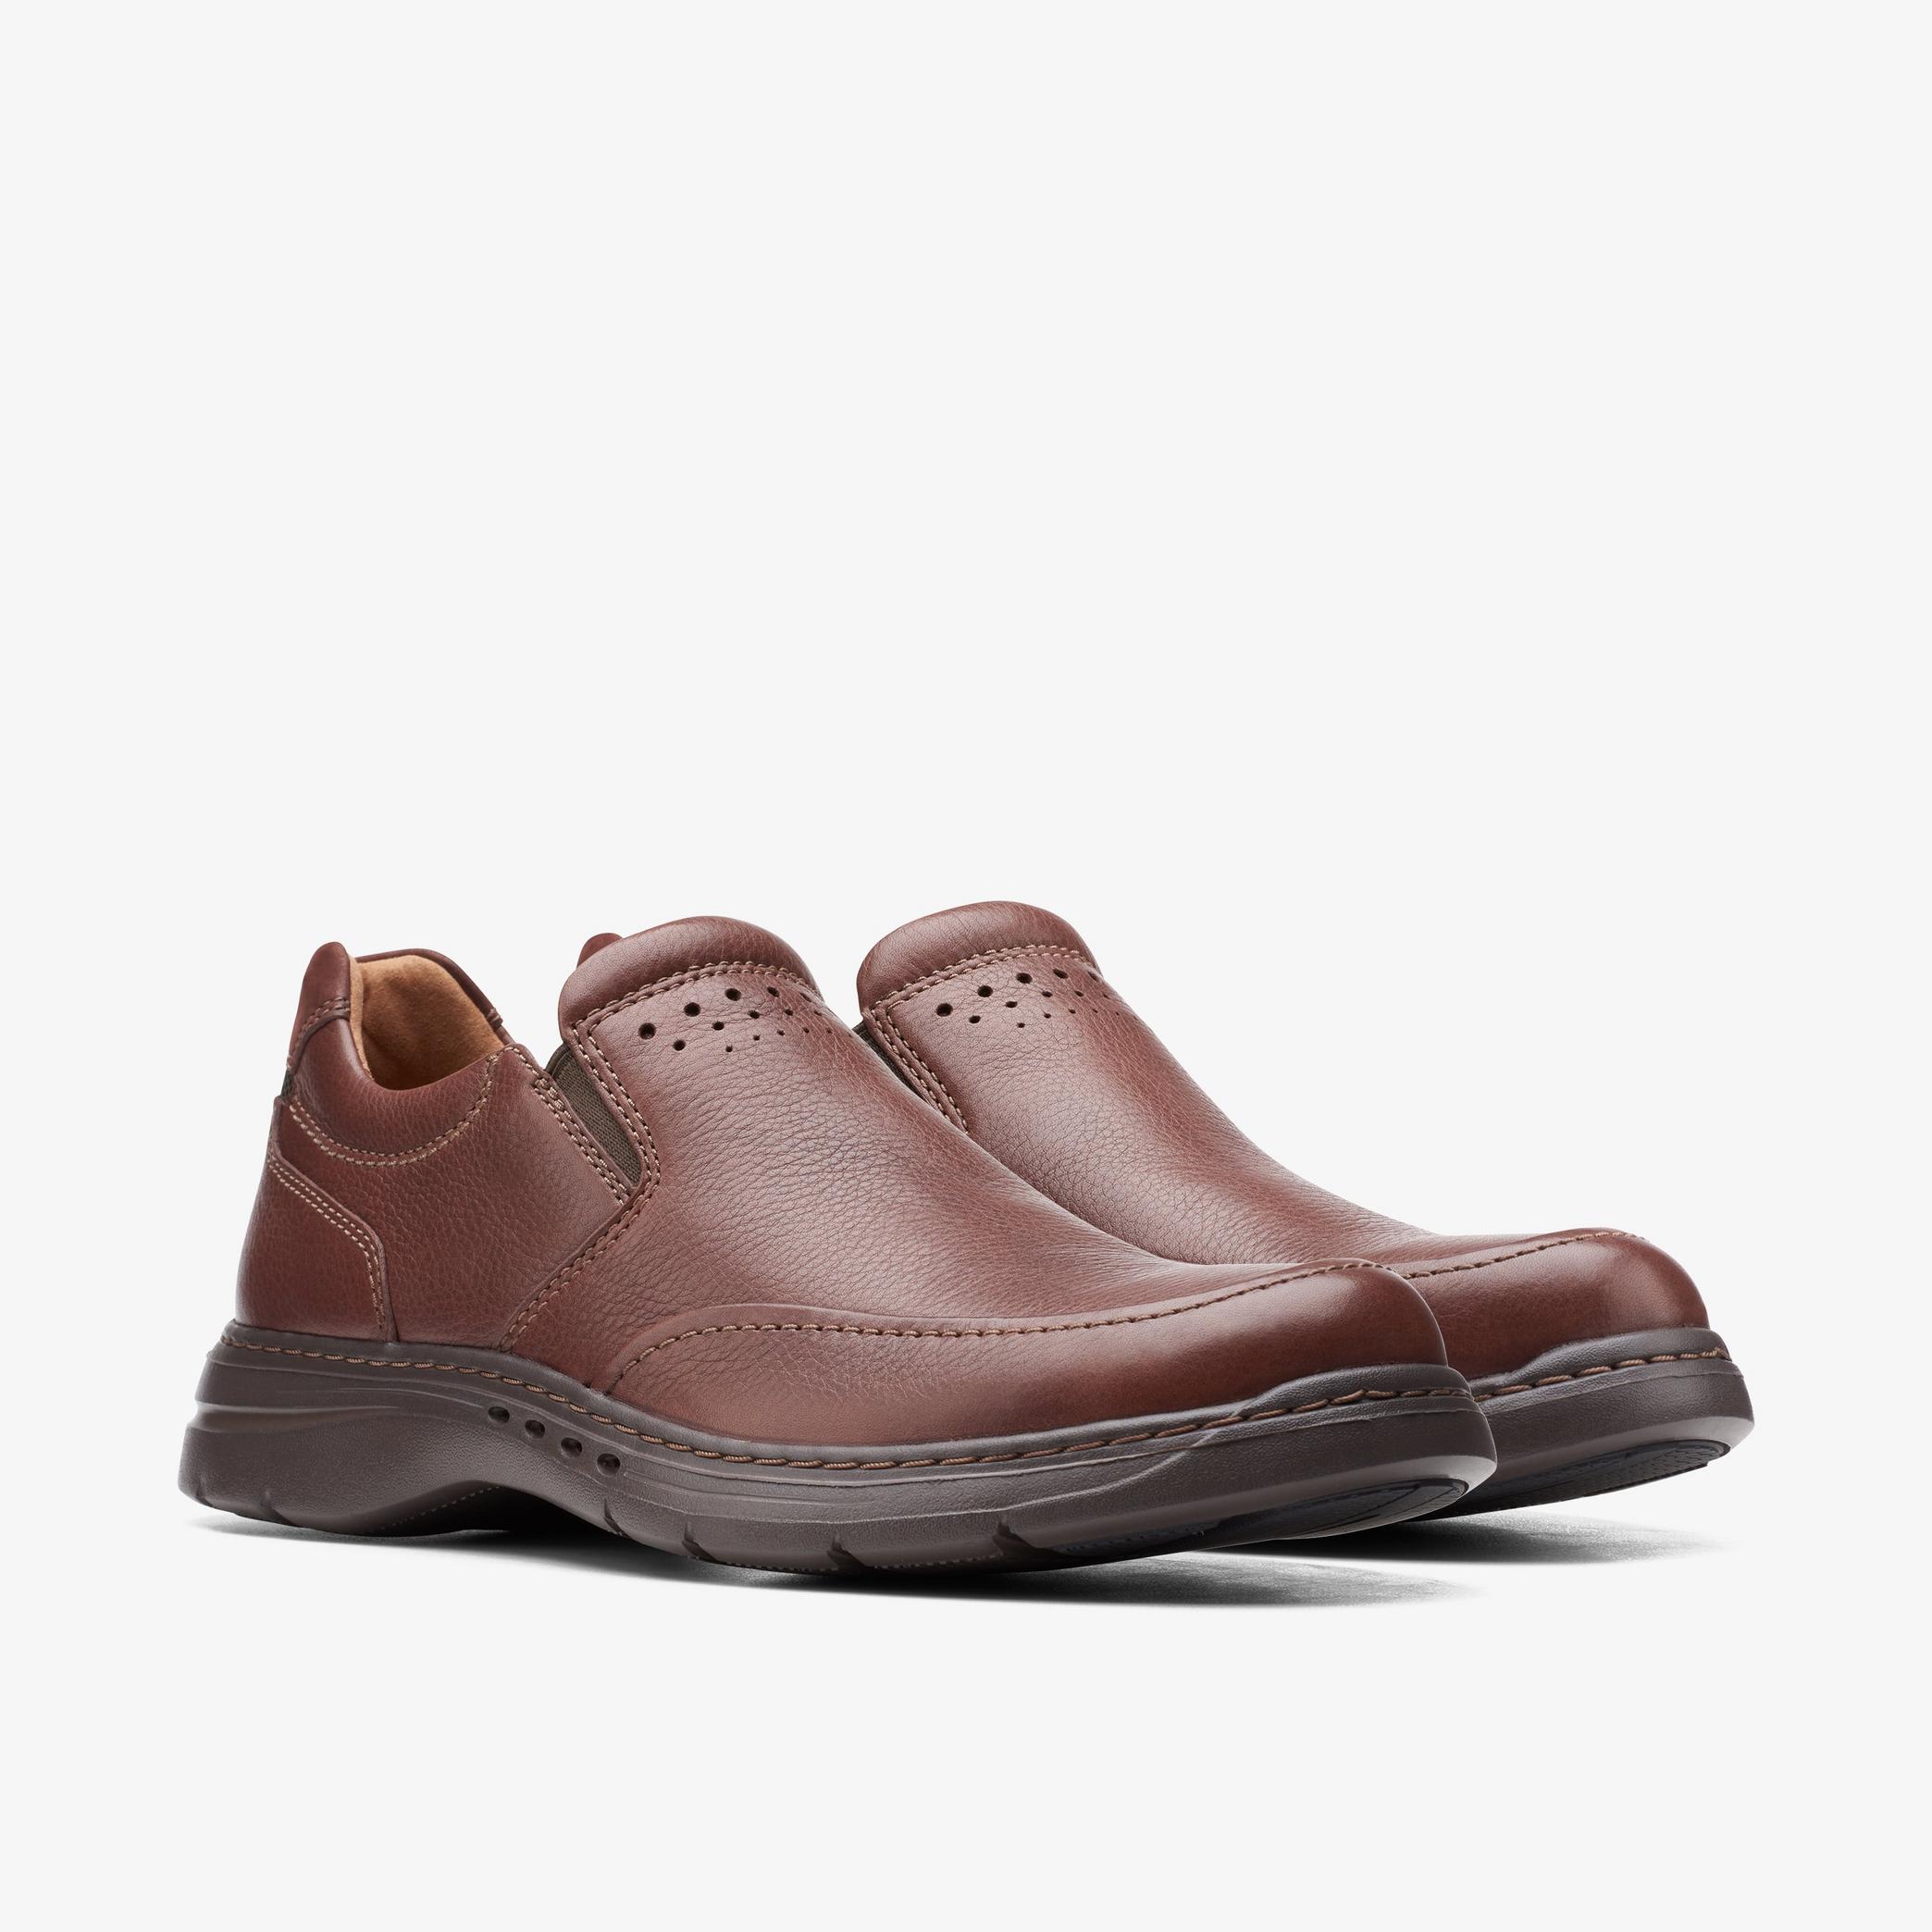 MENS Un Brawley Step Mahogany Leather Loafers | Clarks US